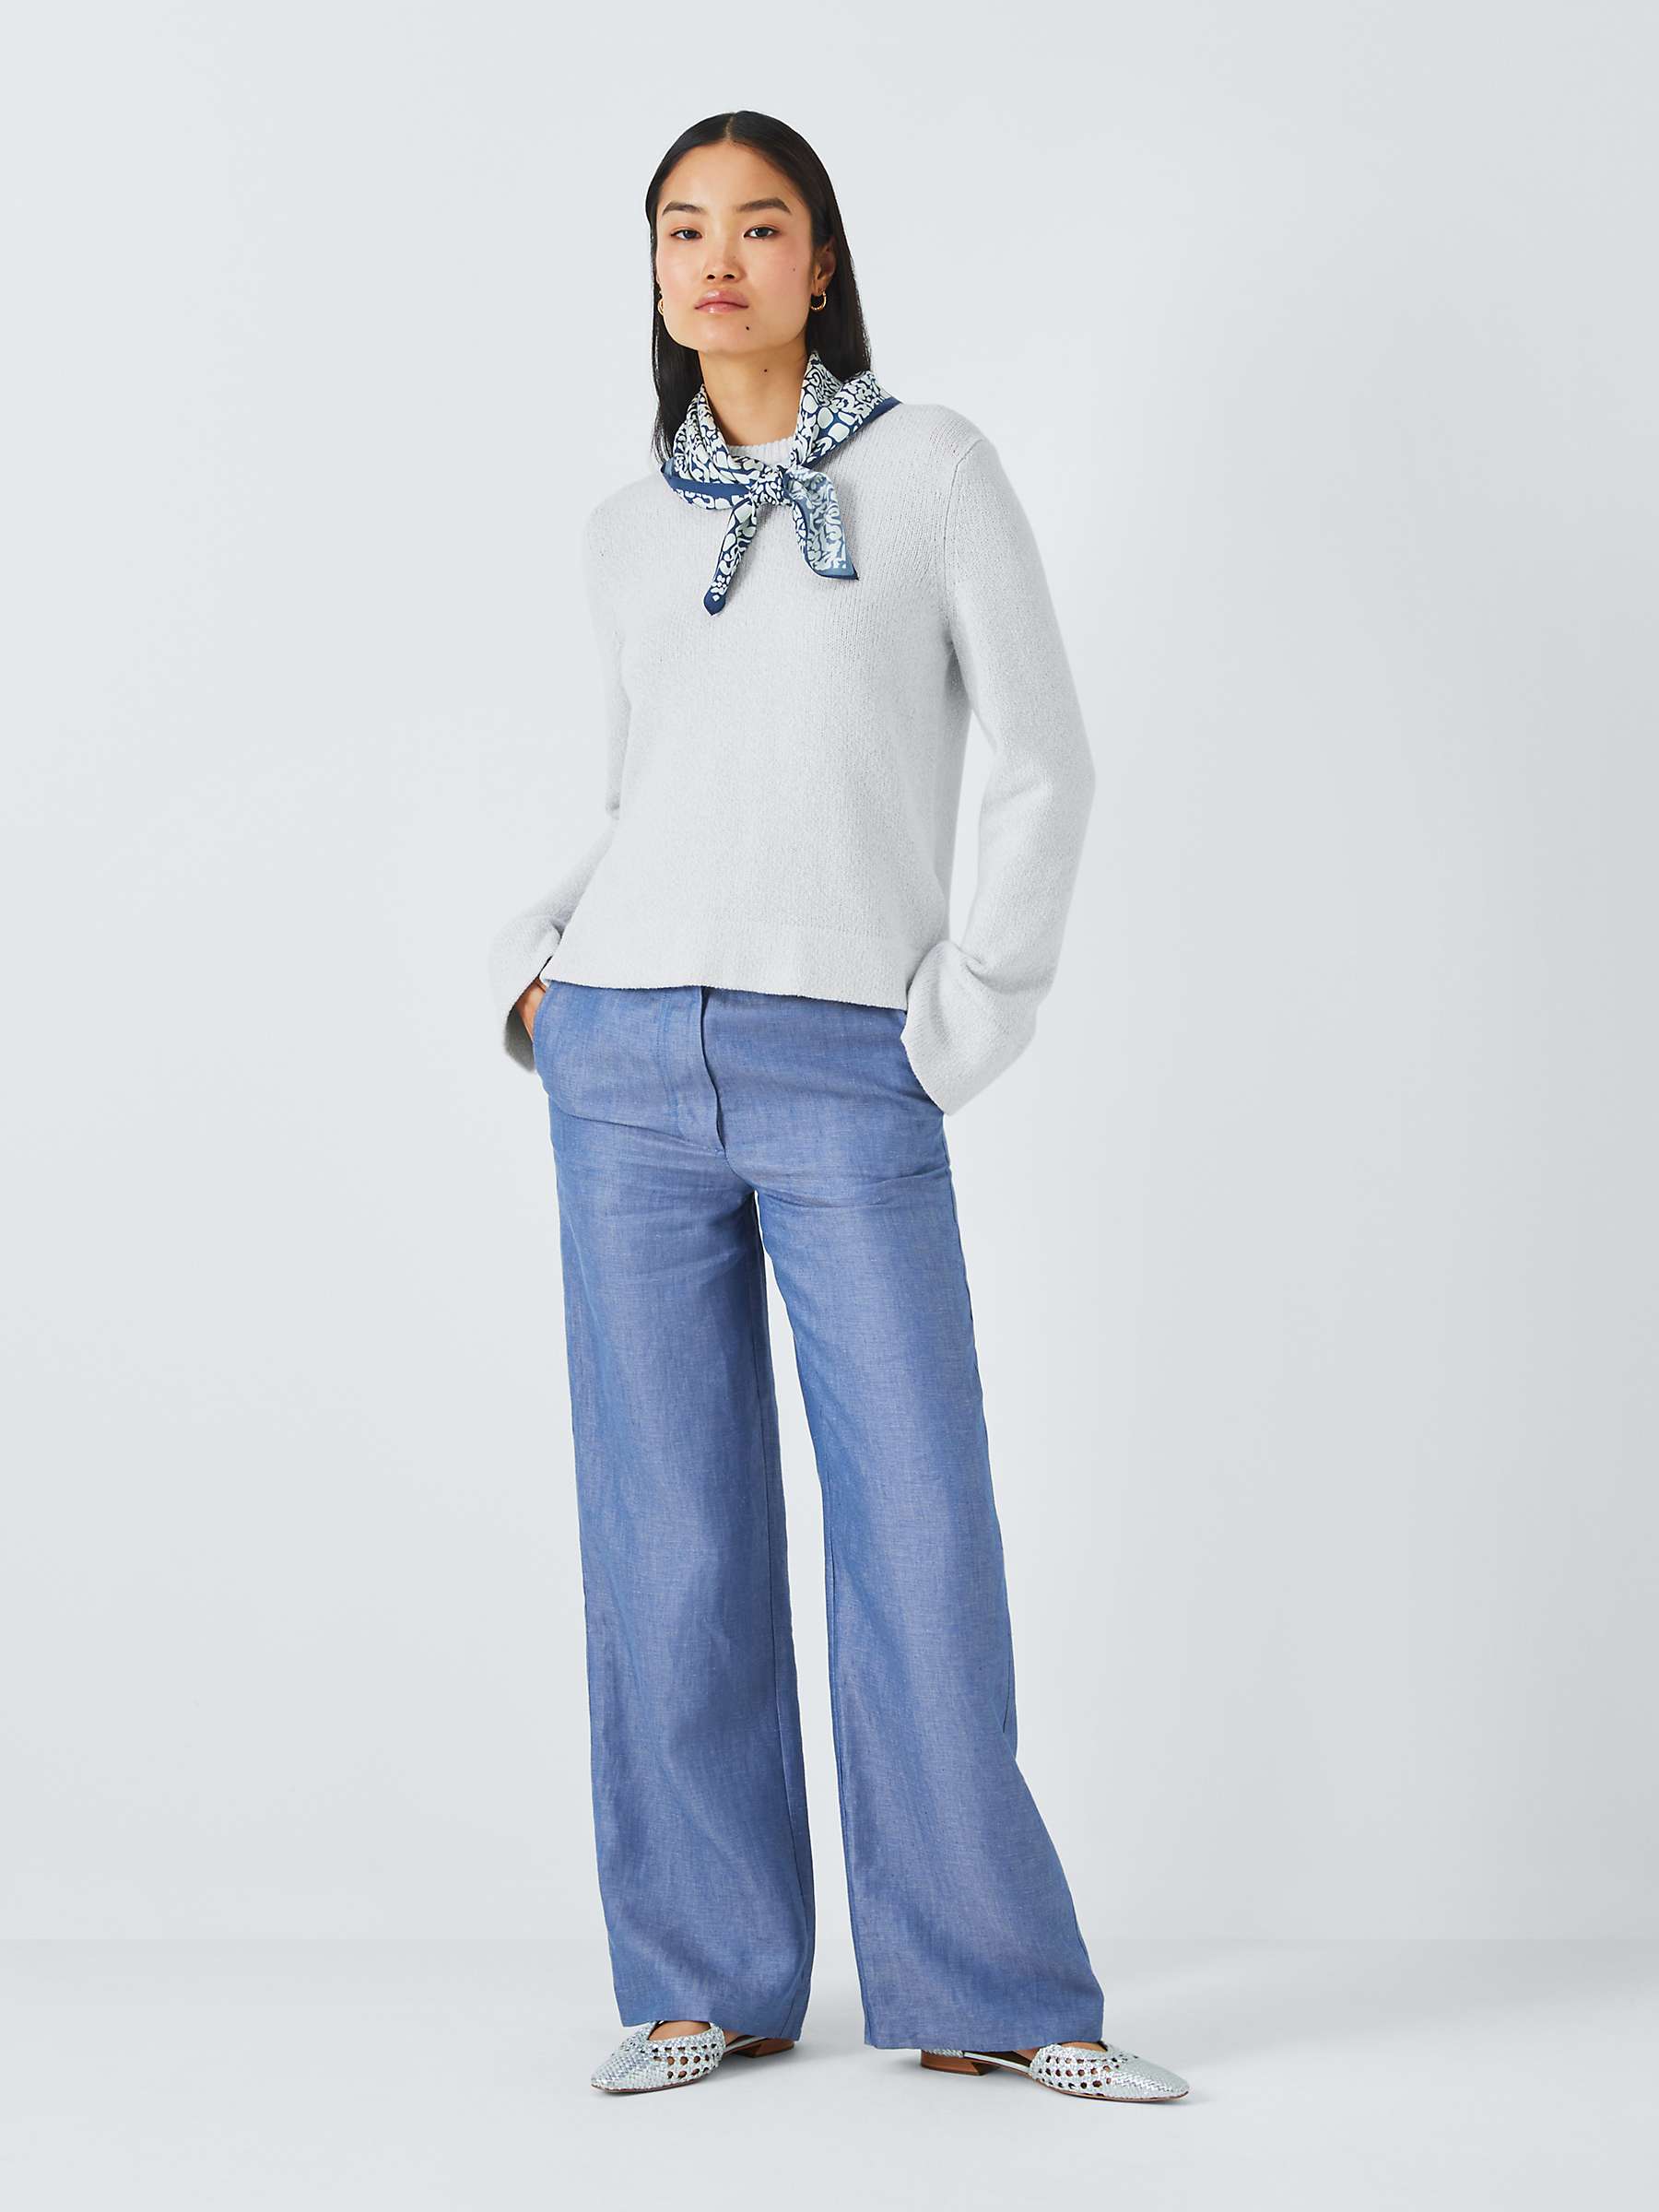 Buy Theory Wool Blend Jumper, Ice Mouline Online at johnlewis.com